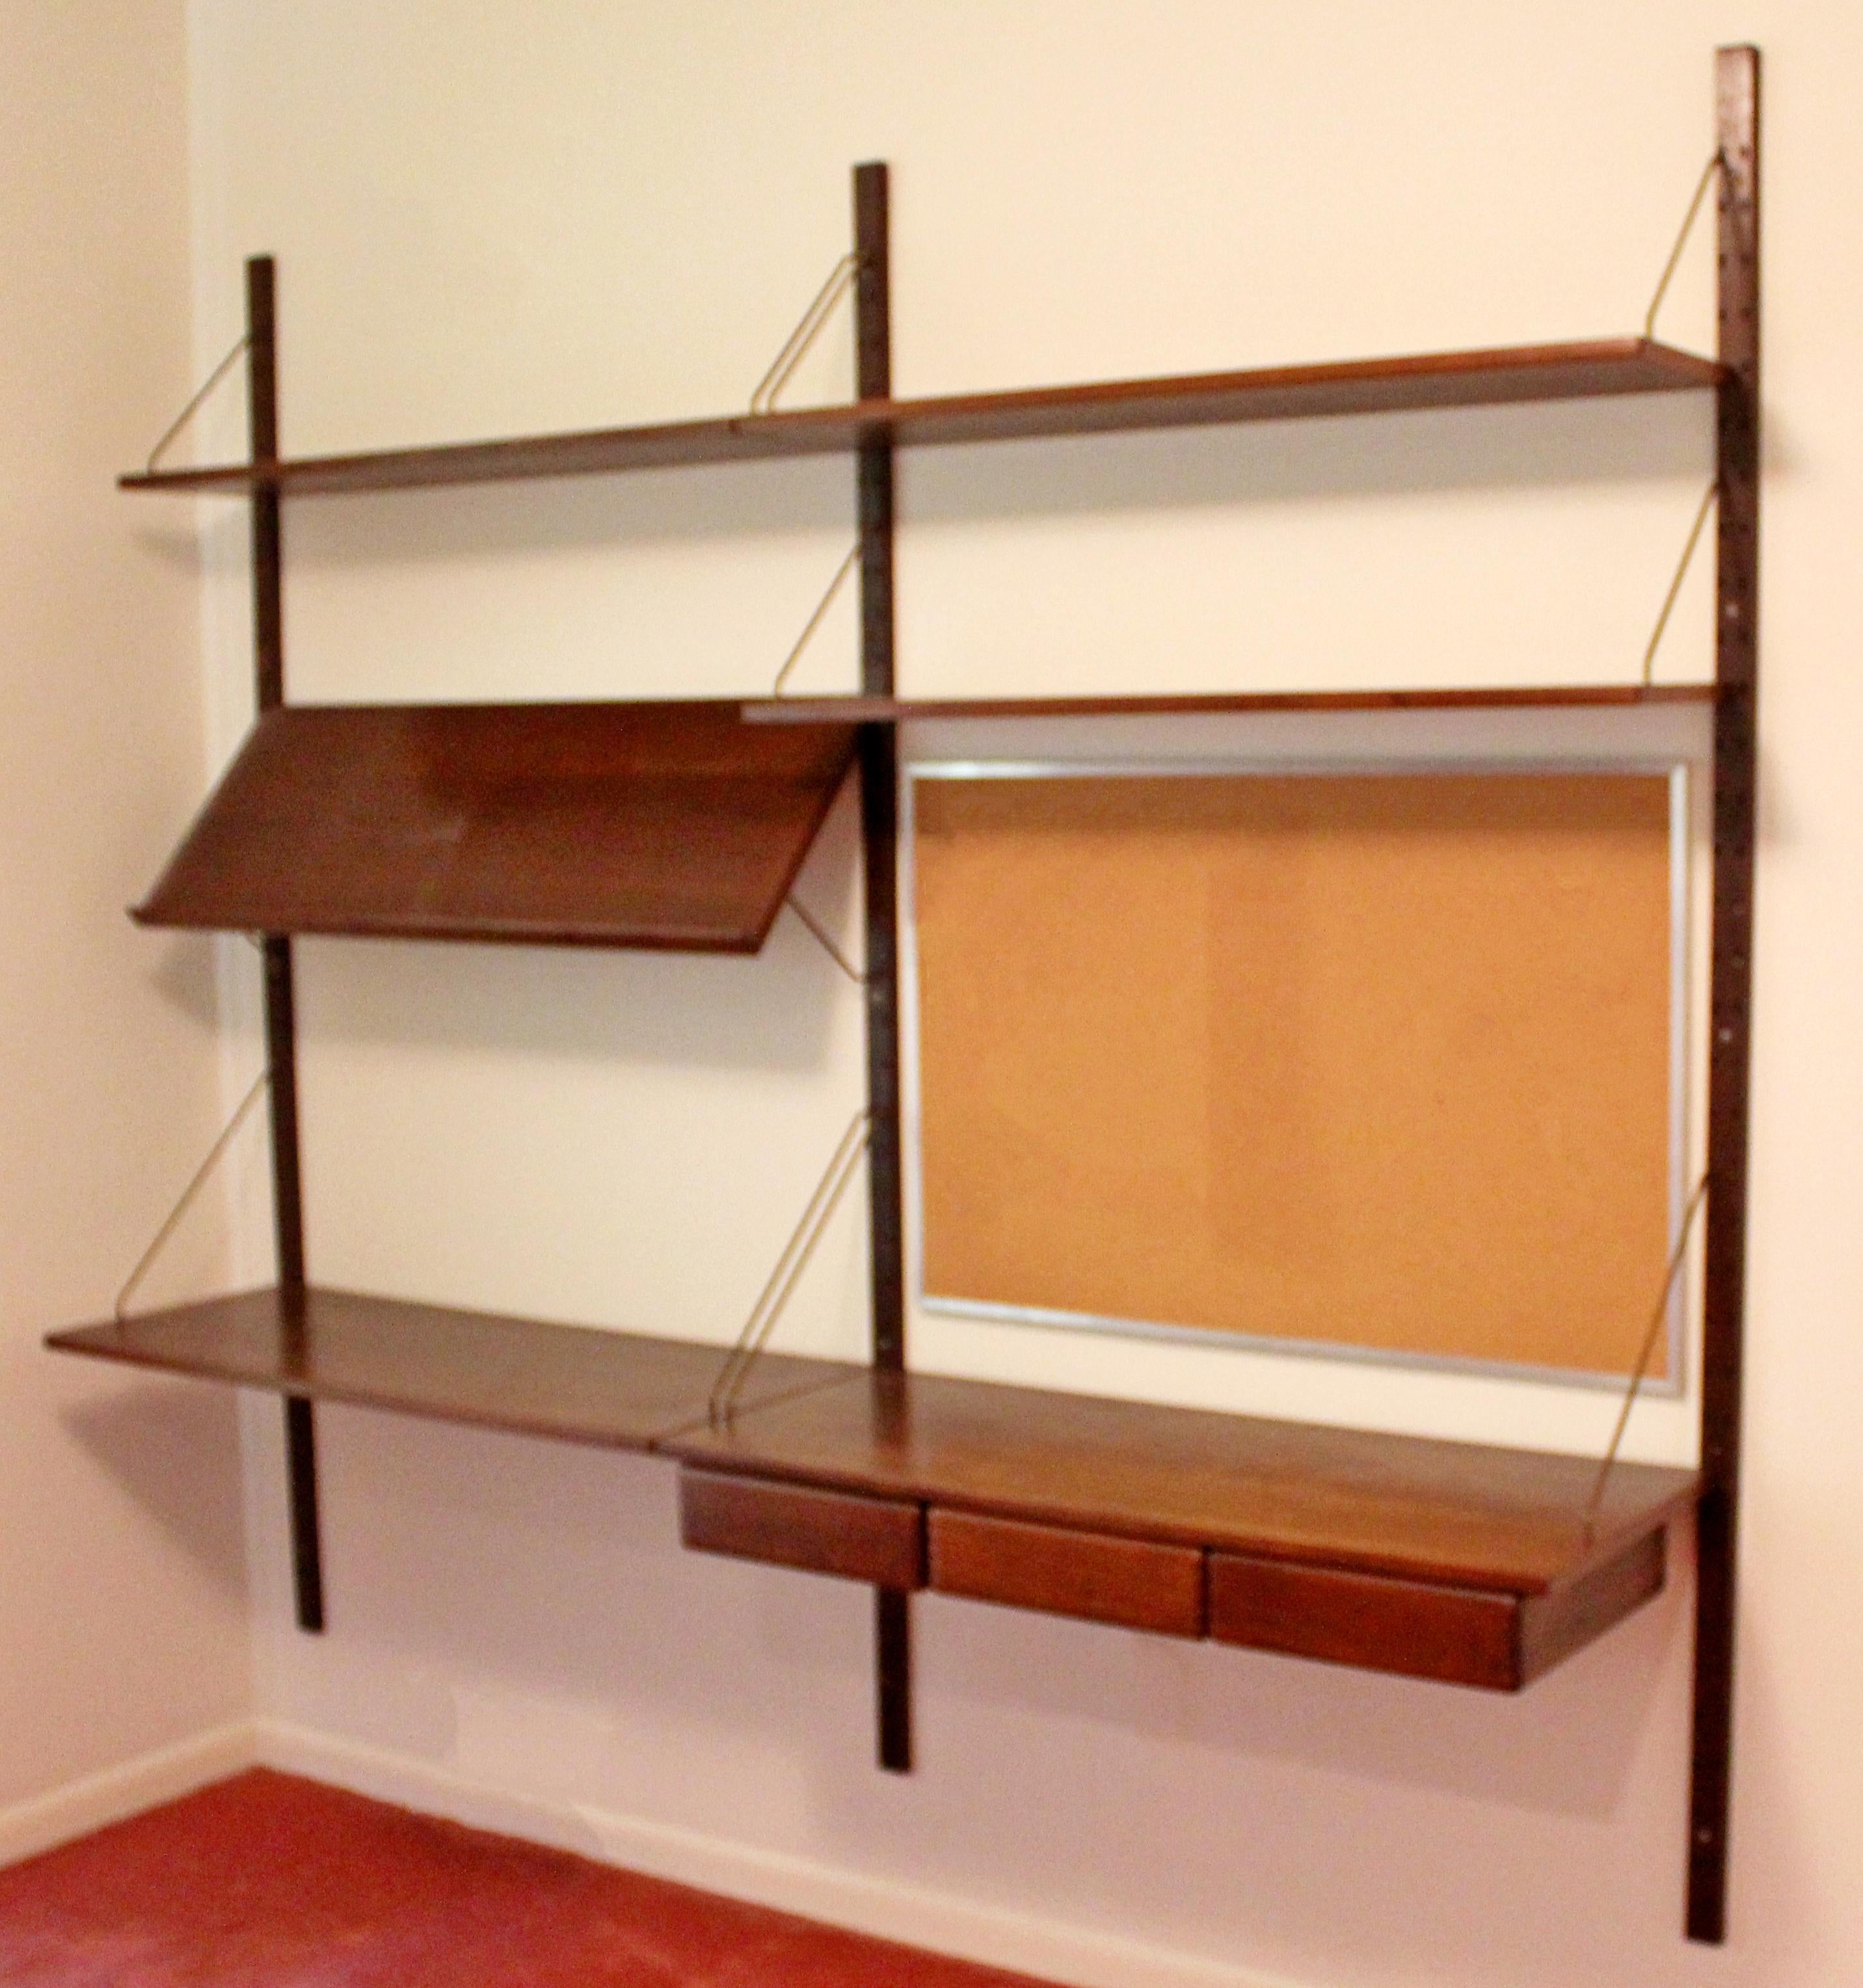 For your consideration is a wonderful Danish wall mounted, floating wall unit, with six shelves a desk and three drawers, by Poul Cadovious, circa the 1960s. In very good vintage condition. The dimensions are 79